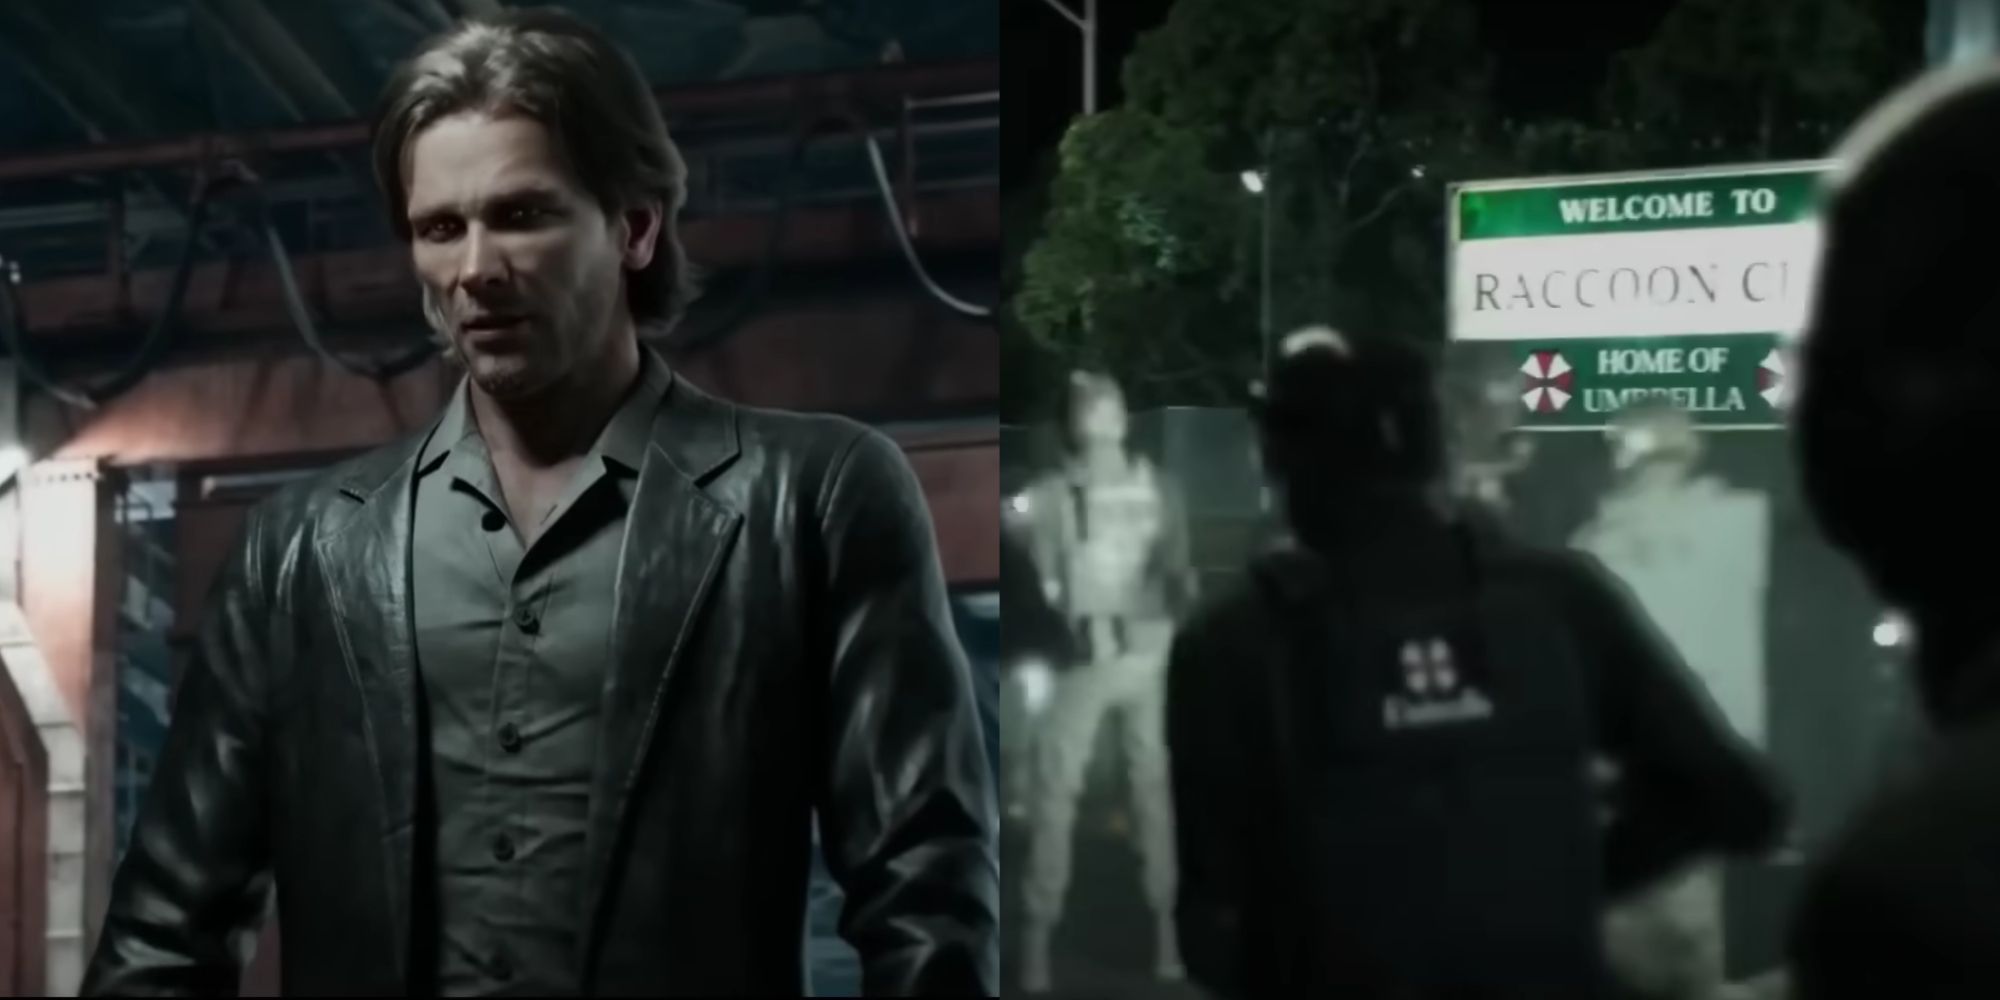 A split image of Dylan, a new enemy, talking to Jill and the team, and a flashback scene of Dylan heading to Raccoon City as a USS soldier.